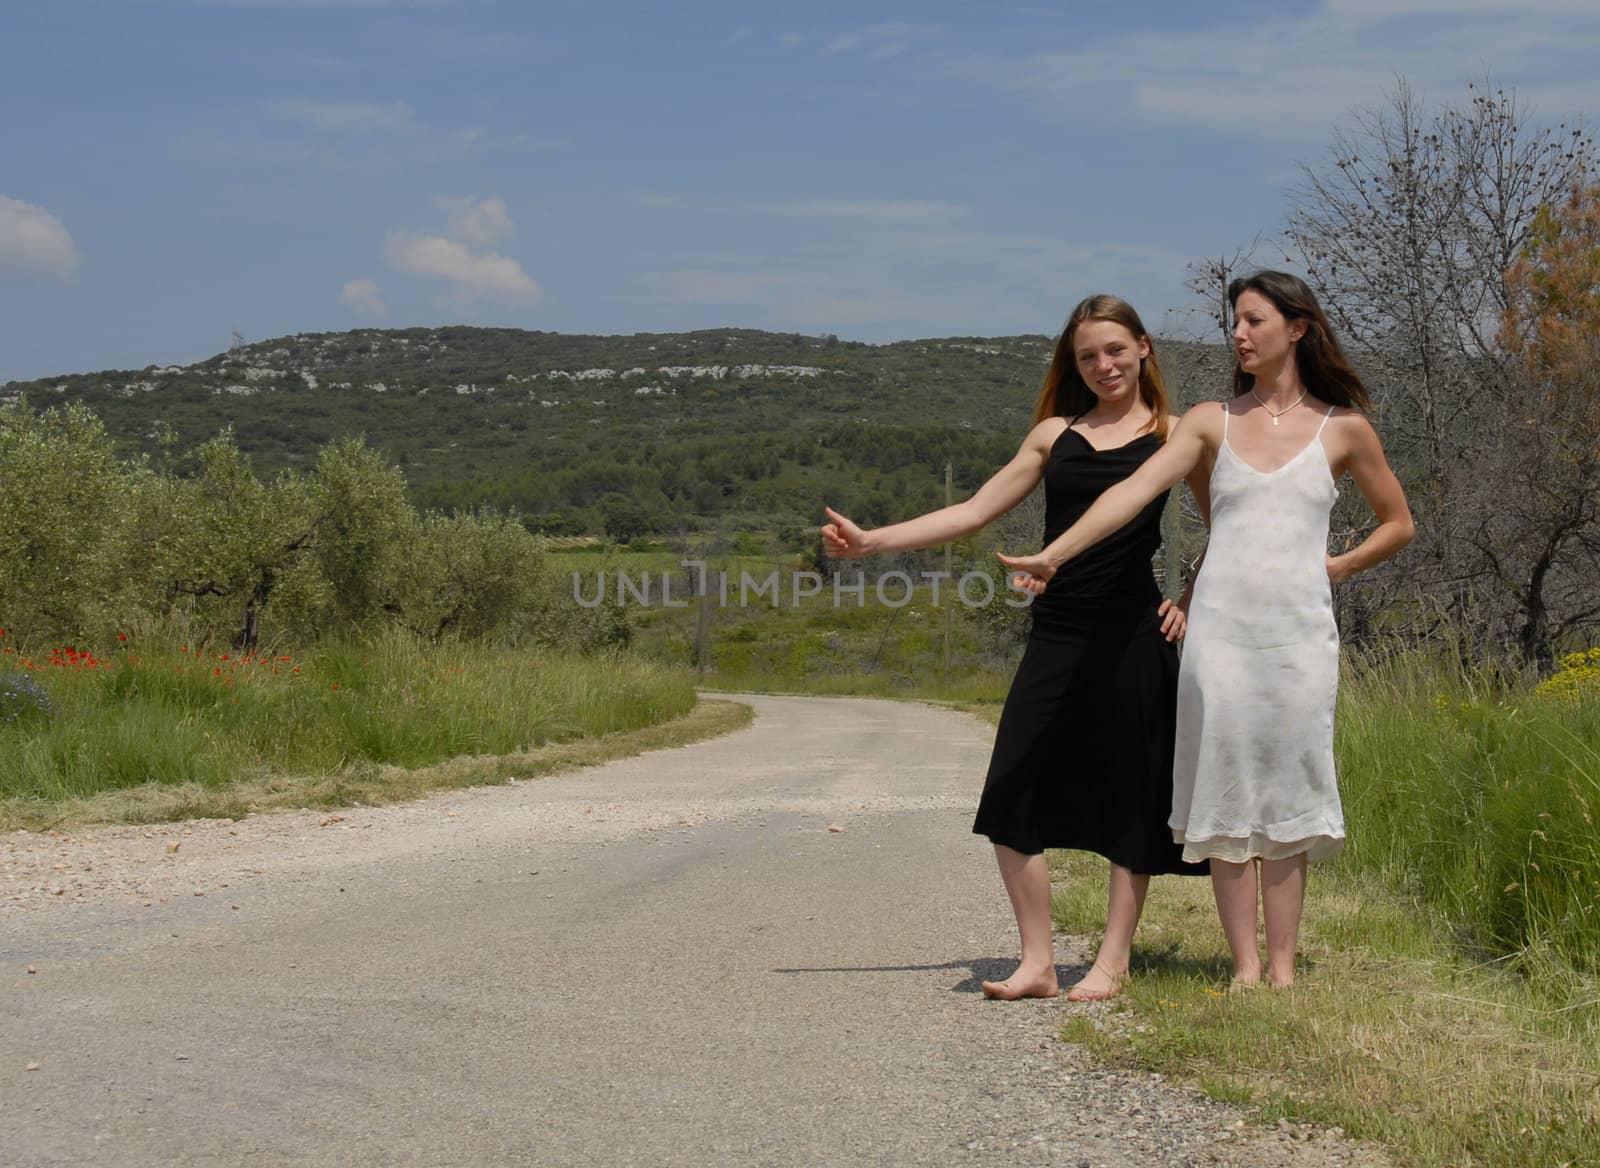 two beautiful young woman hitchhiking on a rural road